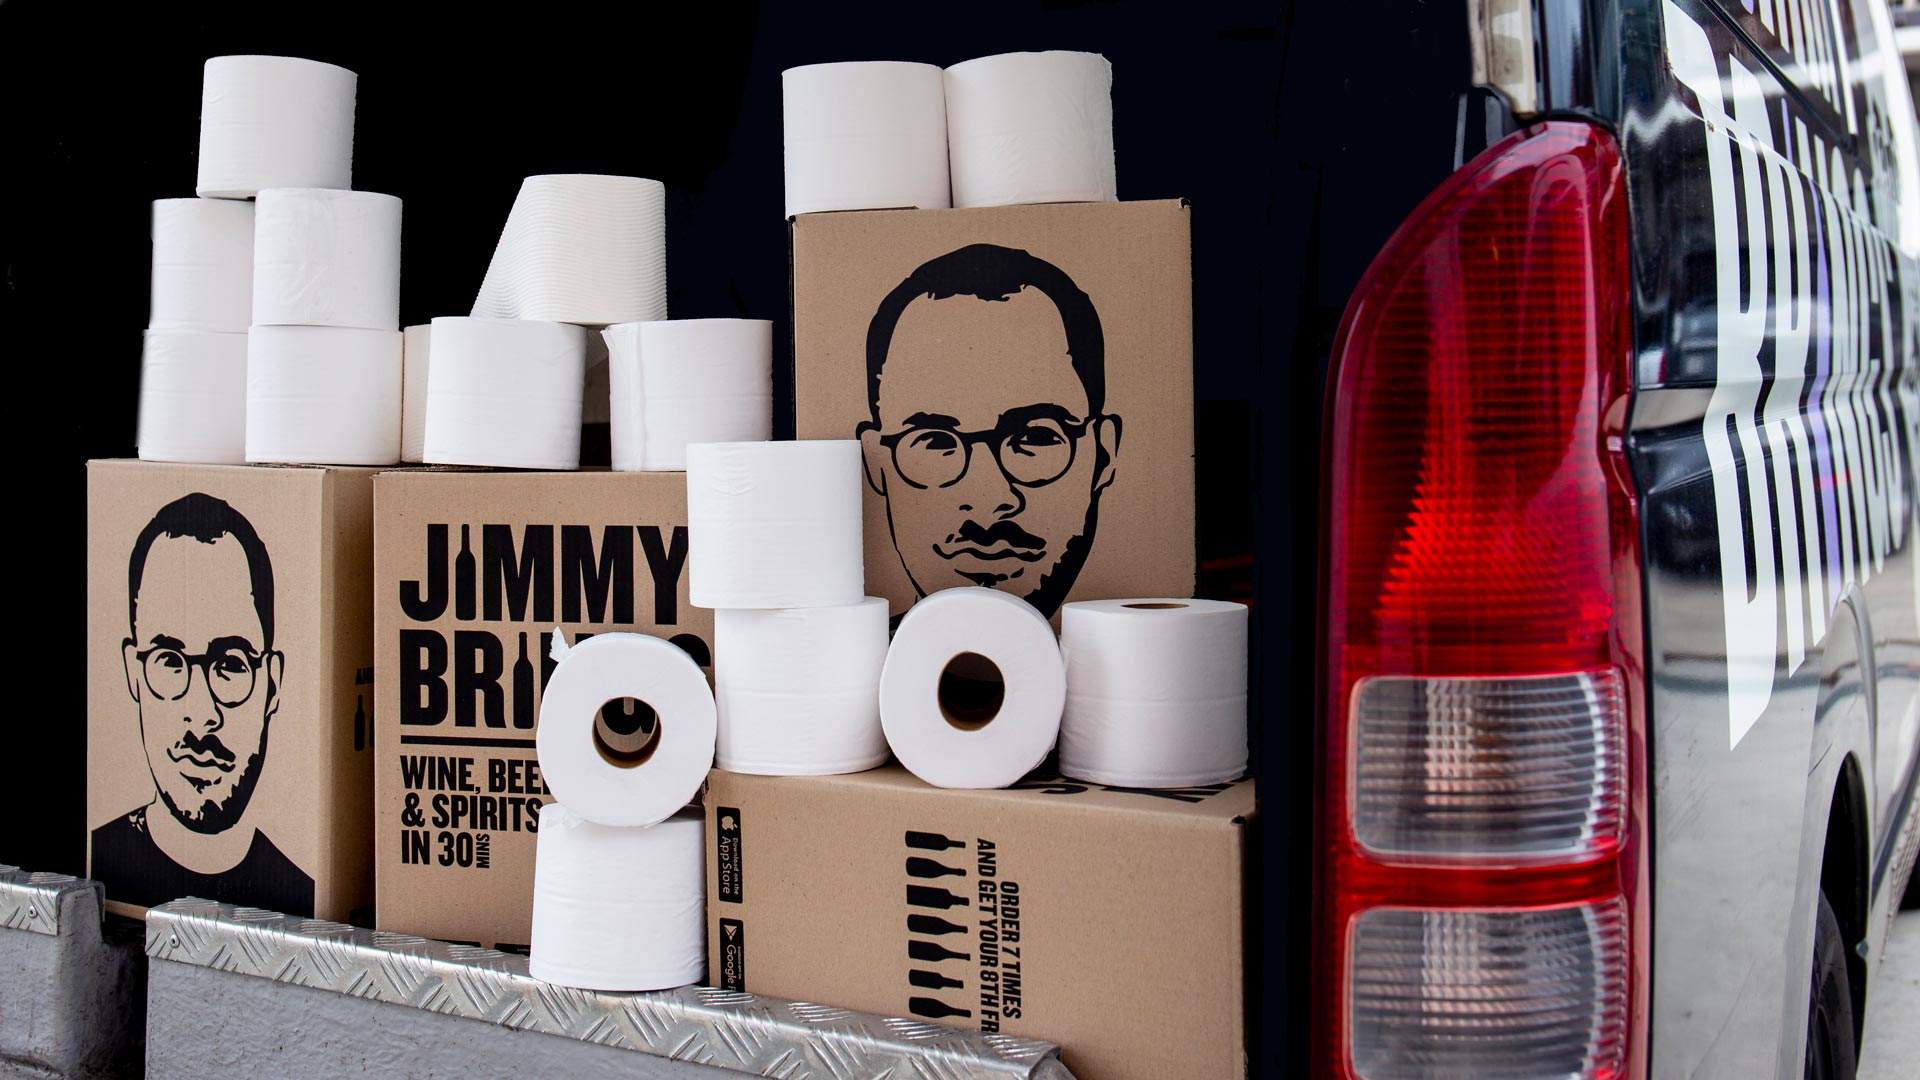 Jimmy Brings Is Delivering Toilet Paper to Your Doorstep in 30 Minutes